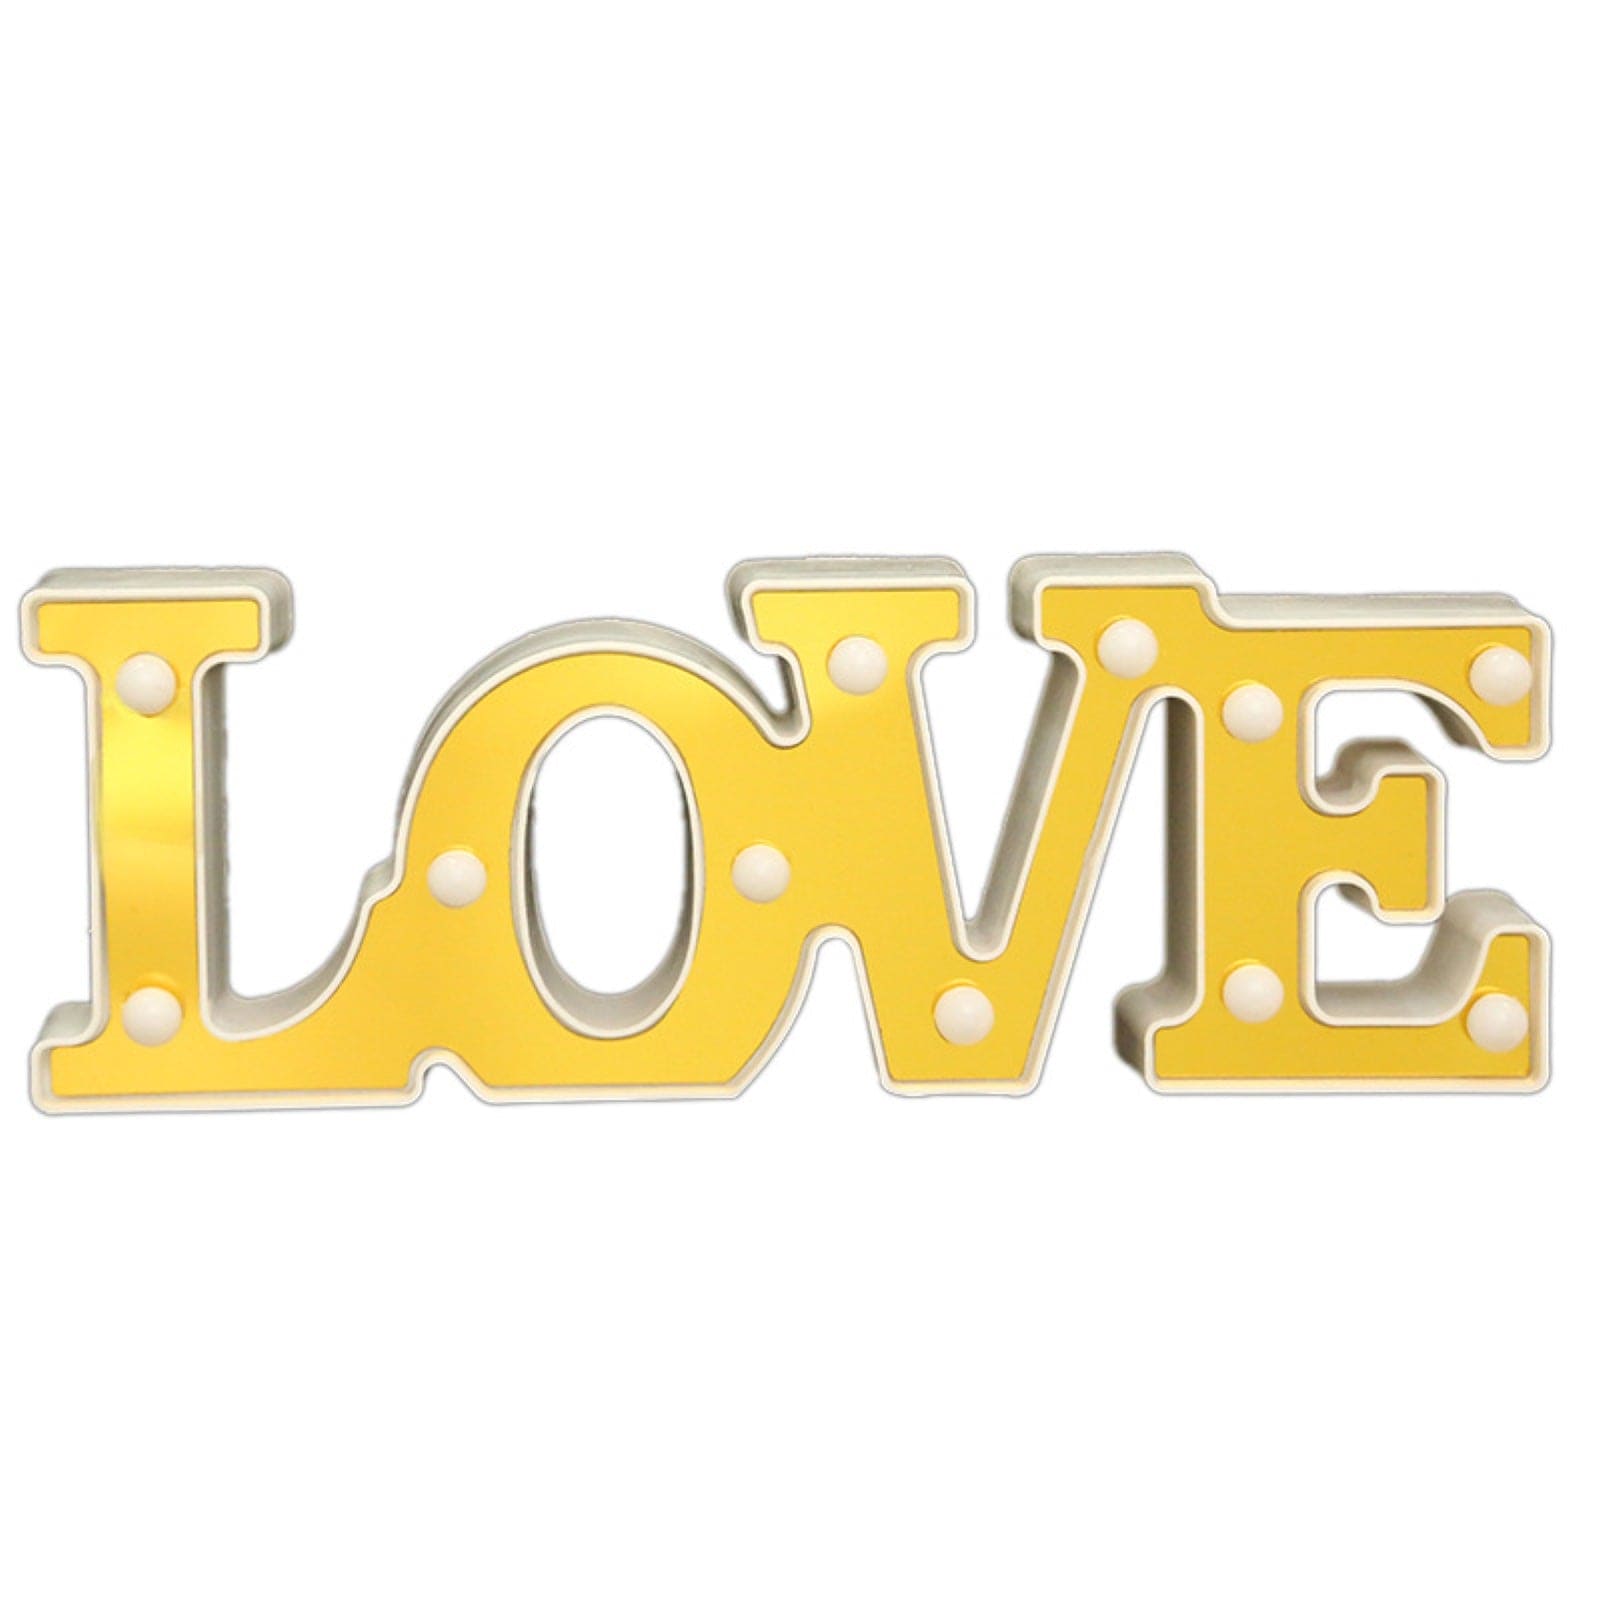 Love Decor Lights, Love Sign For Wall Table, Wedding Decorations Lights, Large Love Bedroom Decor Light, Love Props LED Marquee Letter, Love Sign Lamp For Wedding